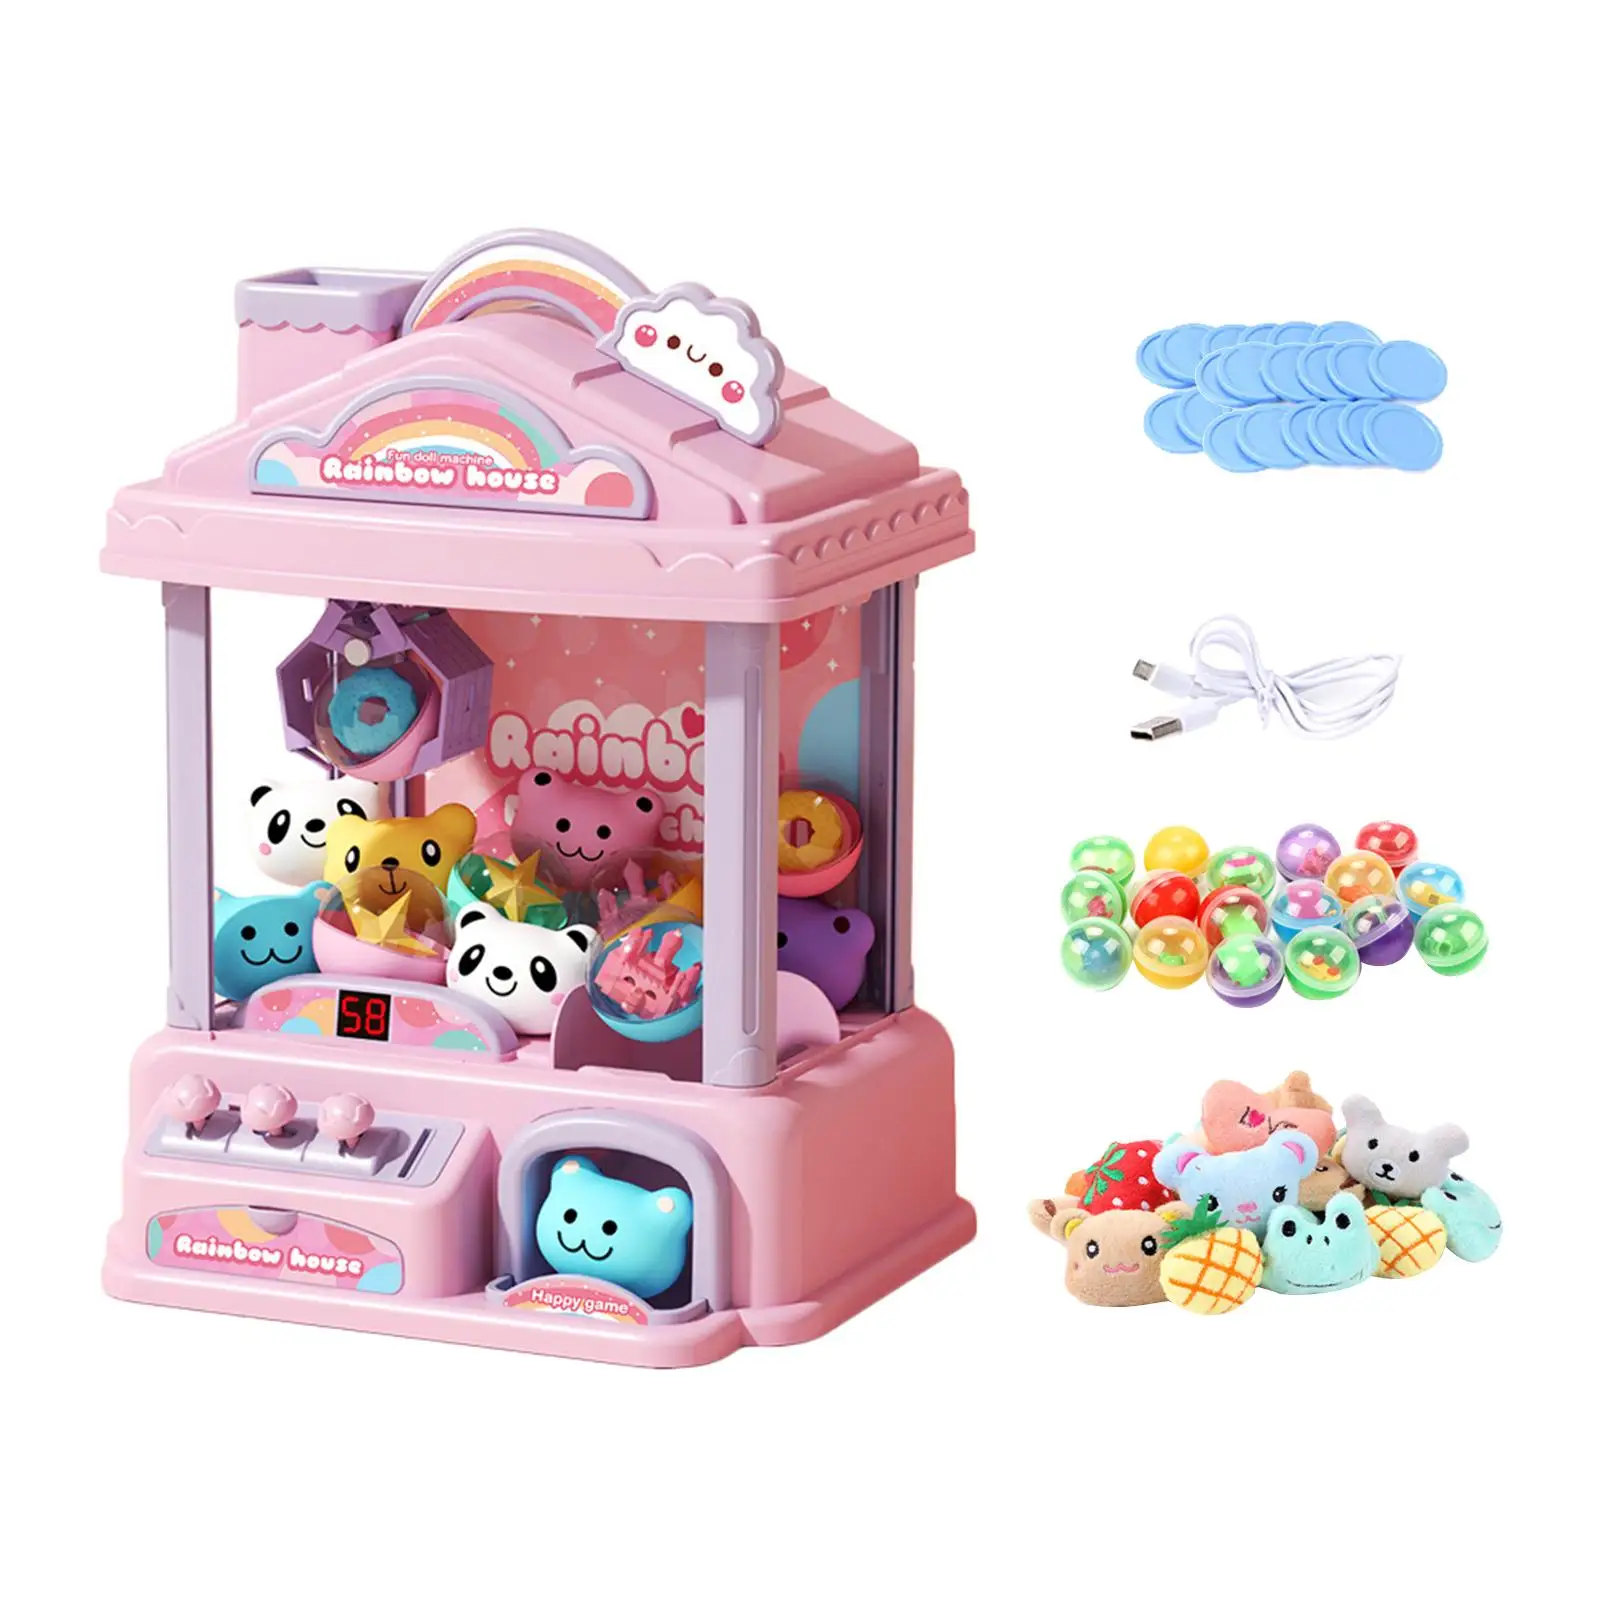 Claw Machine Arcade Game with 20 Mini Plush Animals Arcade Candy Capsule Claw Game Prizes Toy for 3-6 Years Old Adults Toddler